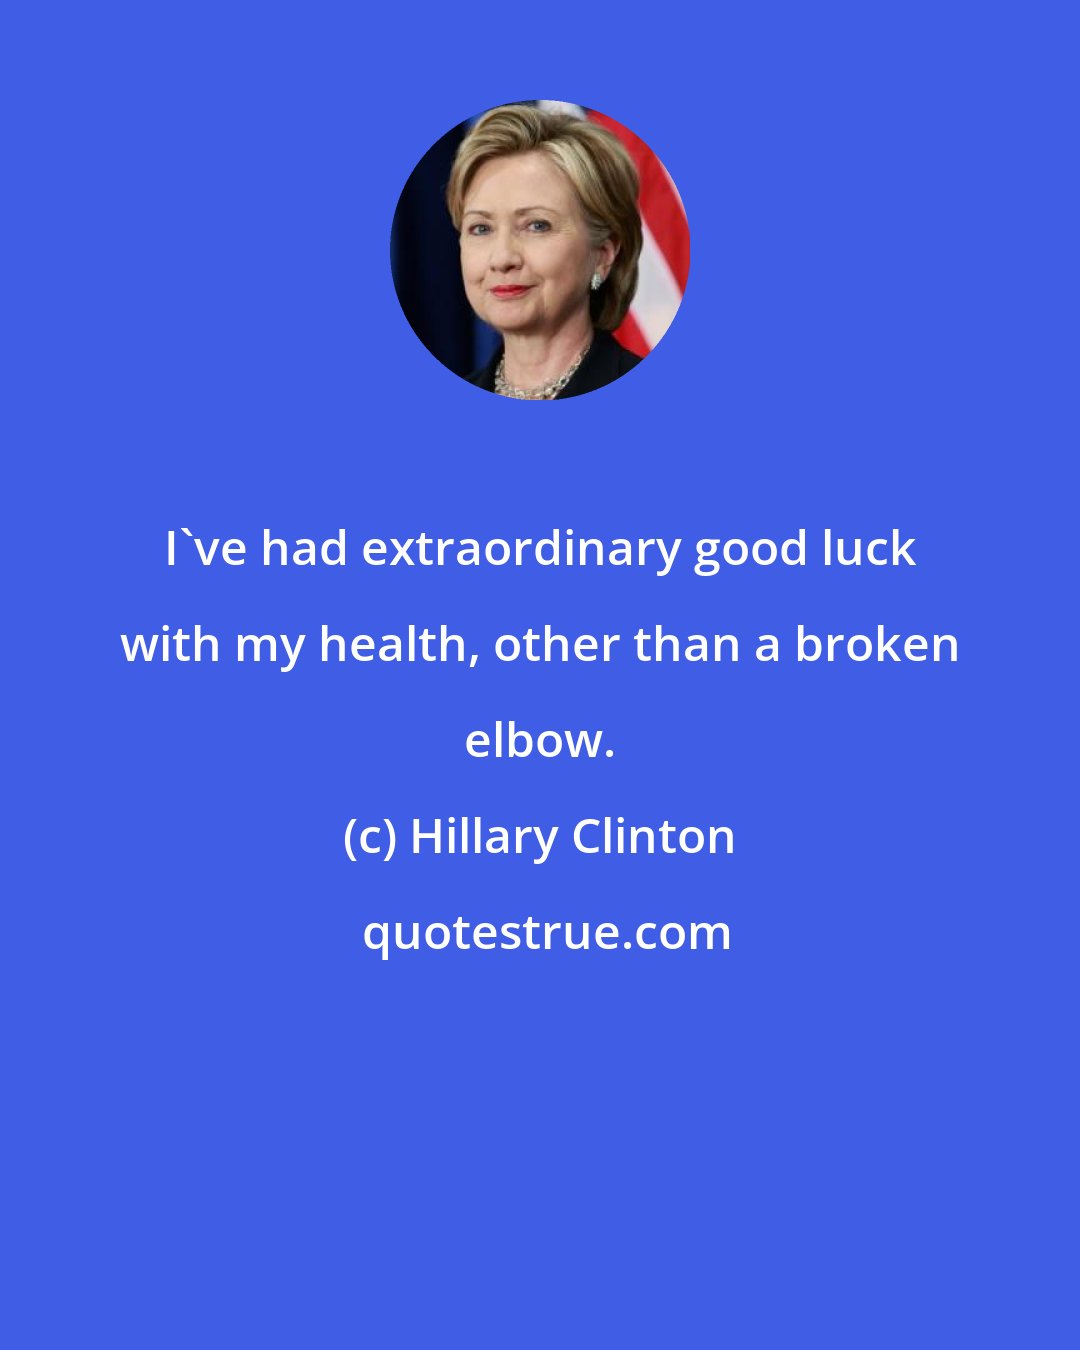 Hillary Clinton: I've had extraordinary good luck with my health, other than a broken elbow.